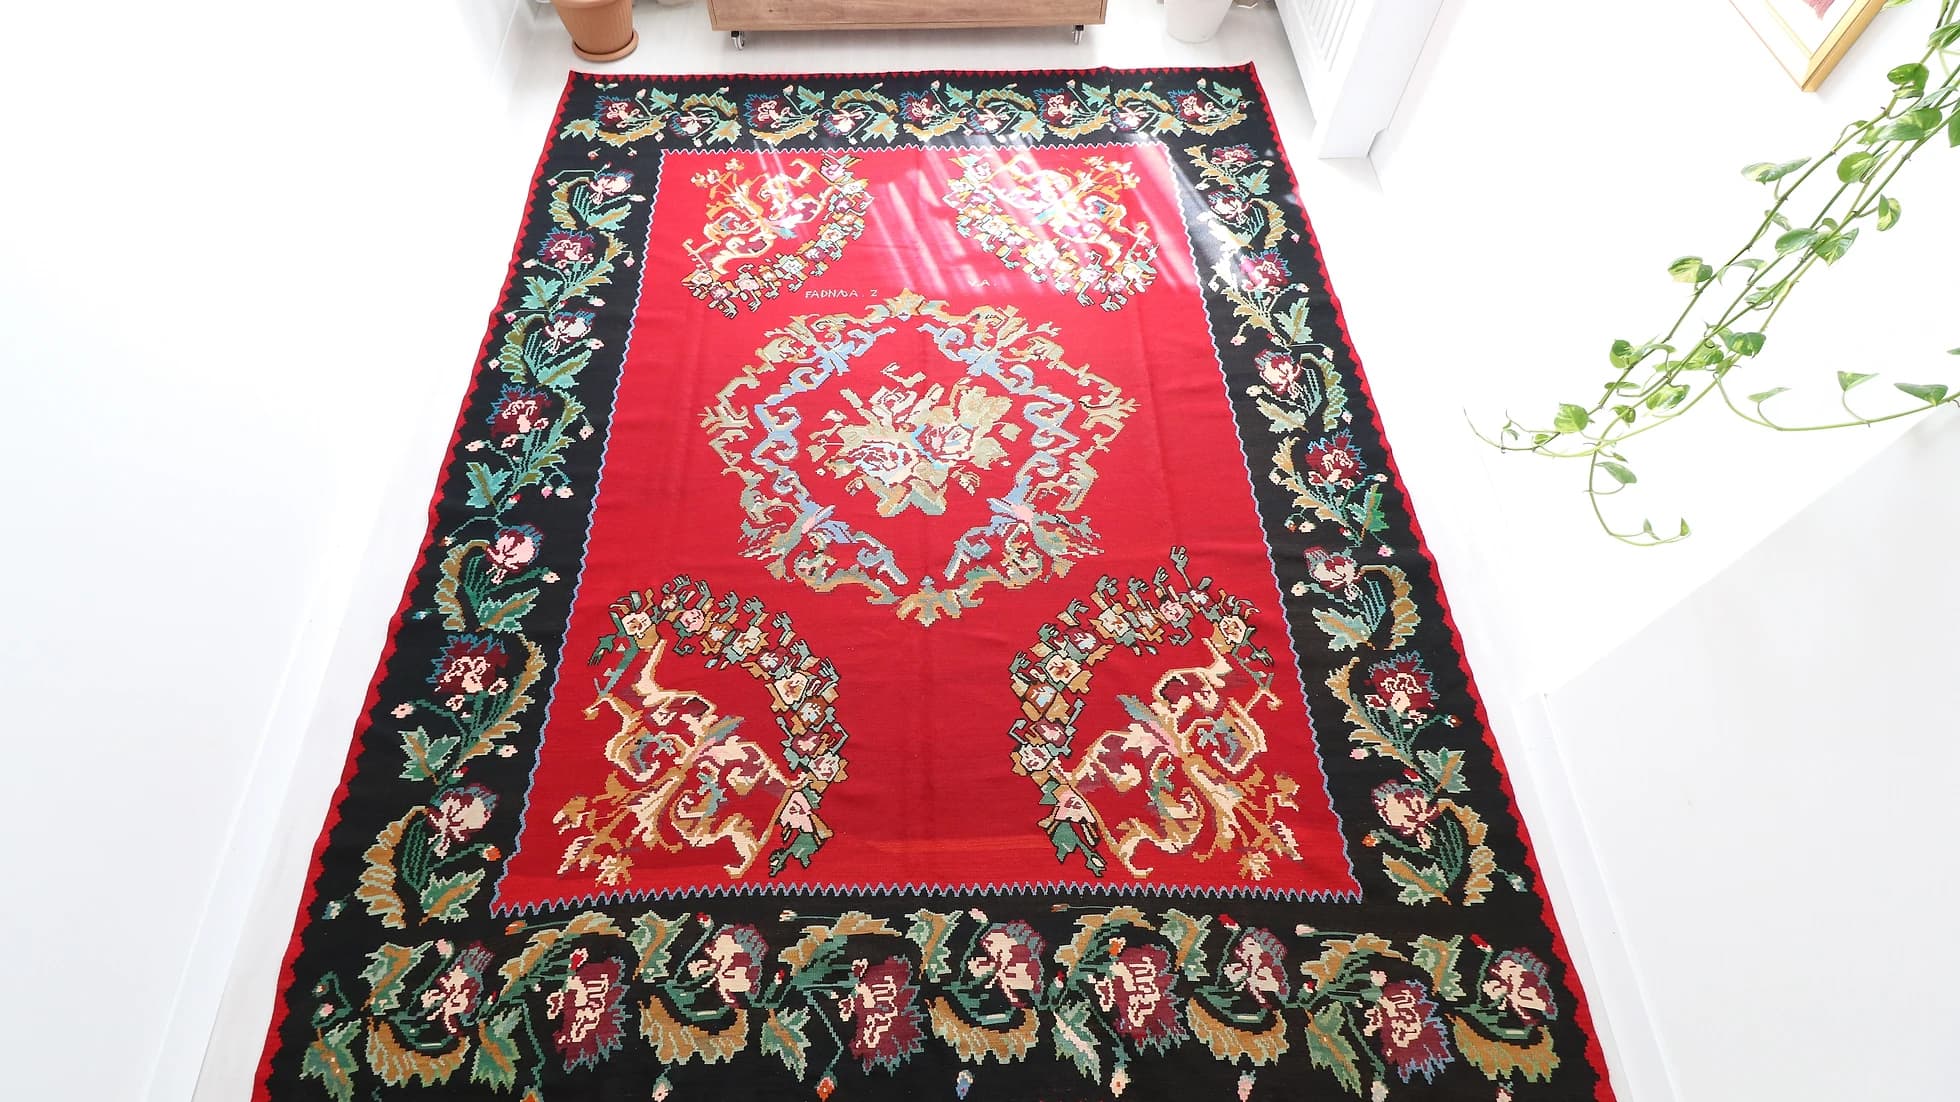 Vintage Hand-knotted Bessarabian Rug in red shades with floral design signed by the artisan